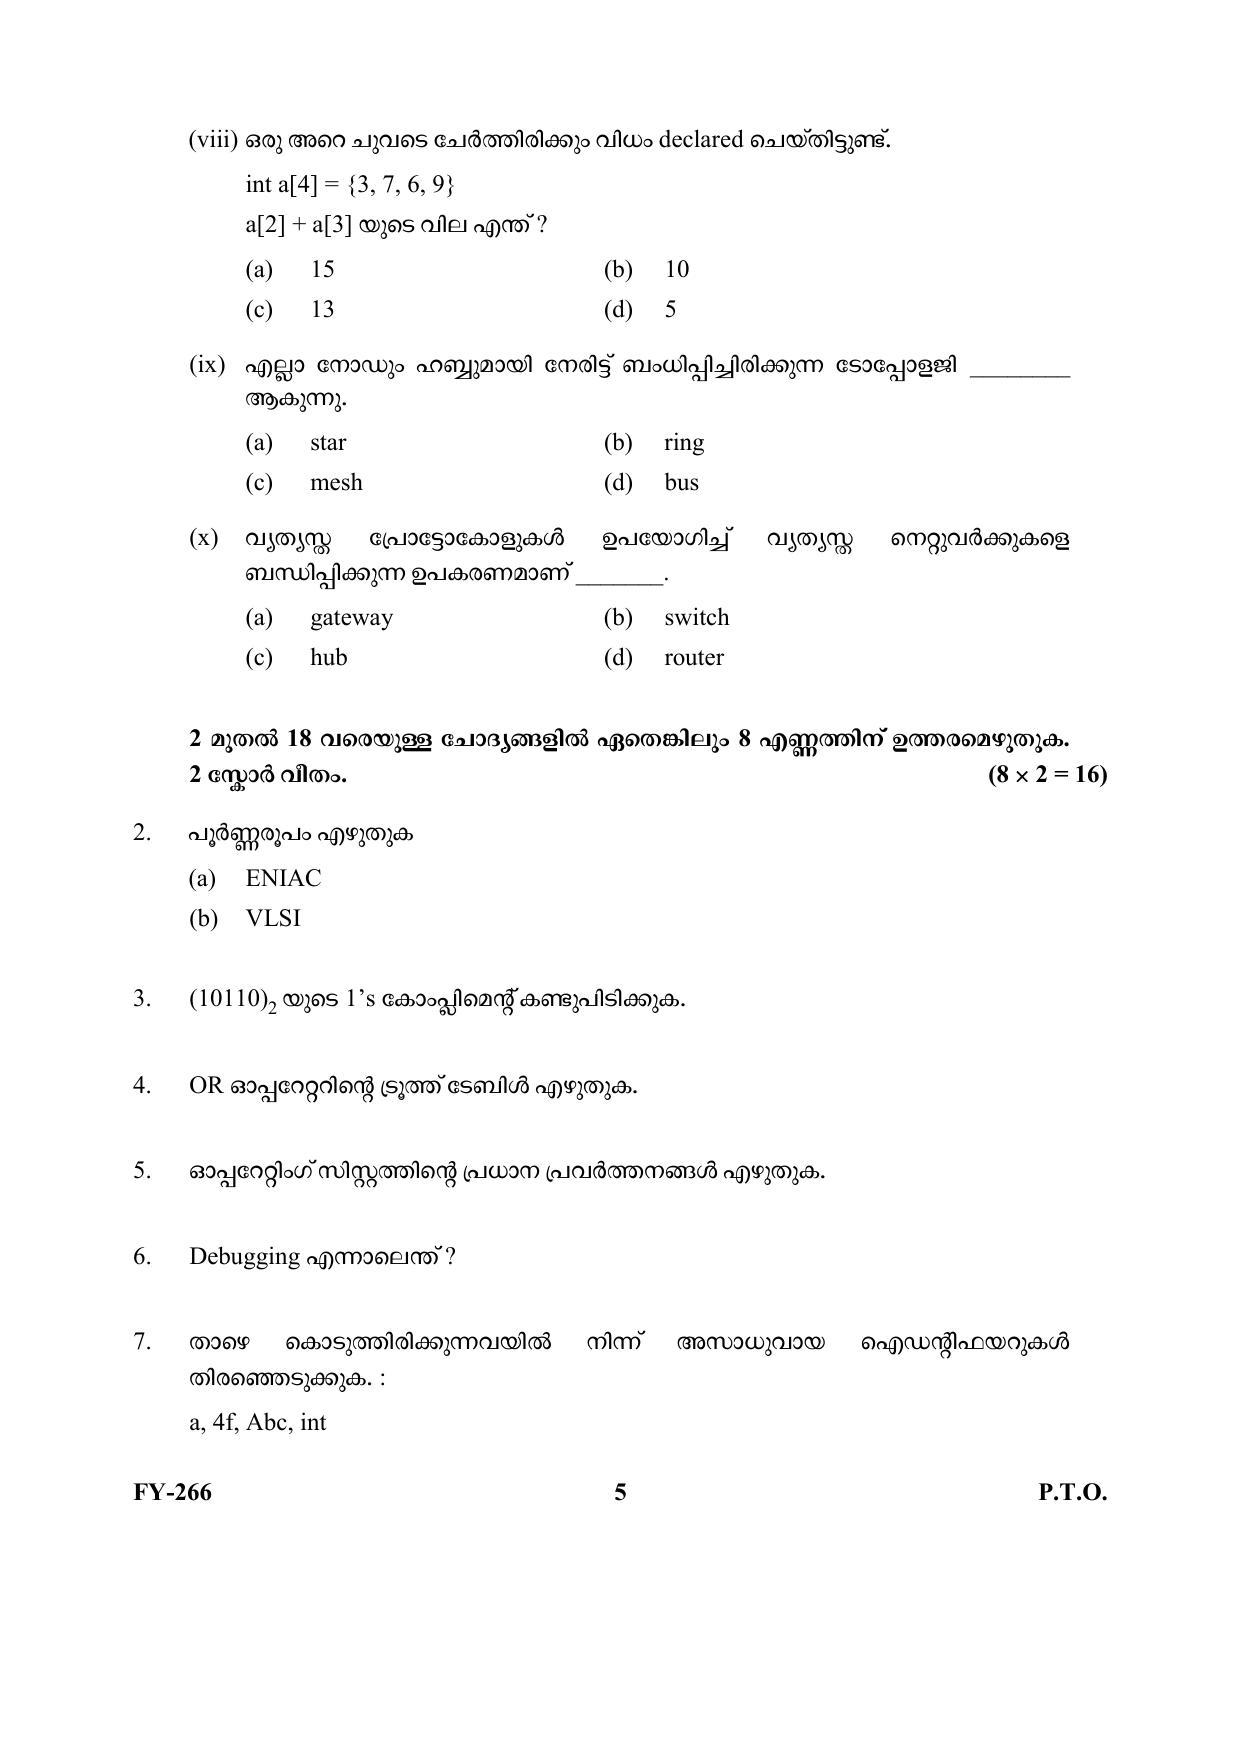 Kerala Plus One (Class 11th) Computer Science (Hearing Impaired) Question Paper 2021 - Page 5